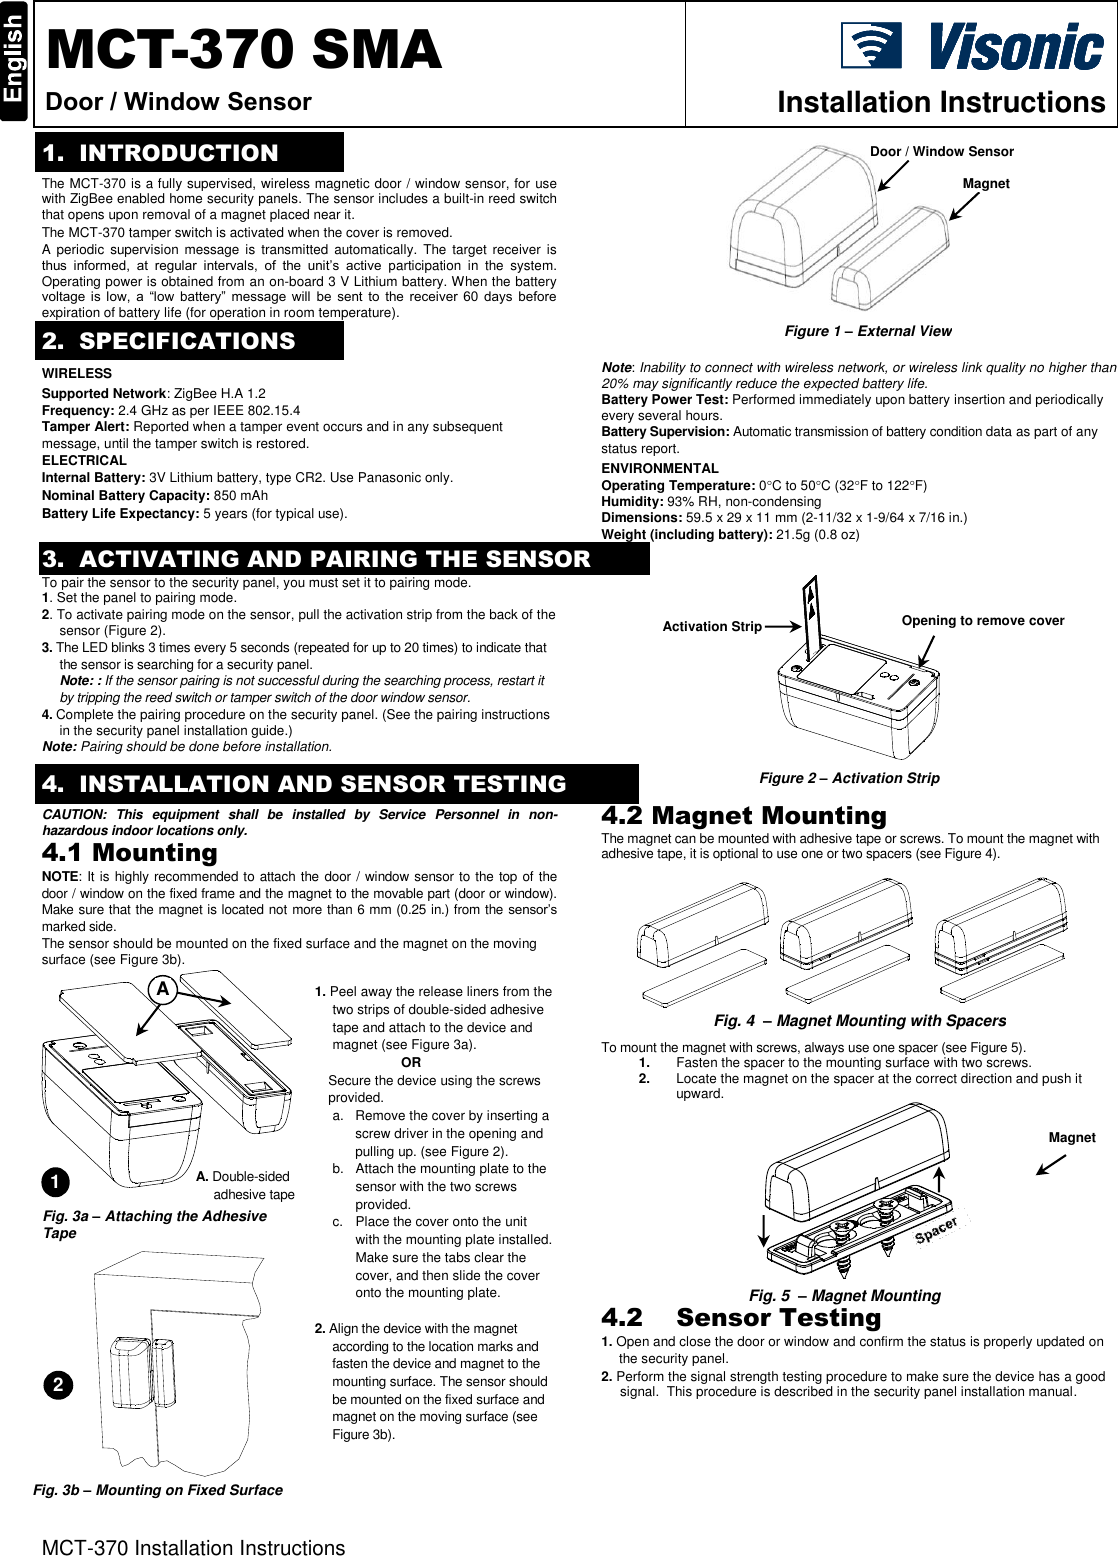 MCT-370 Installation Instructions  MCT-370 SMA Door / Window Sensor  Installation Instructions  1. INTRODUCTION The MCT-370 is a fully supervised, wireless magnetic door / window sensor, for use with ZigBee enabled home security panels. The sensor includes a built-in reed switch that opens upon removal of a magnet placed near it.  The MCT-370 tamper switch is activated when the cover is removed. A  periodic  supervision  message  is  transmitted  automatically.  The  target  receiver  is thus  informed,  at  regular  intervals,  of  the  unit’s  active  participation  in  the  system. Operating power is obtained from an on-board 3 V Lithium battery. When the battery voltage  is  low,  a  “low  battery”  message  will  be  sent  to  the  receiver  60  days before expiration of battery life (for operation in room temperature).         2. SPECIFICATIONS WIRELESS Supported Network: ZigBee H.A 1.2 Frequency: 2.4 GHz as per IEEE 802.15.4 Tamper Alert: Reported when a tamper event occurs and in any subsequent message, until the tamper switch is restored. ELECTRICAL Internal Battery: 3V Lithium battery, type CR2. Use Panasonic only. Nominal Battery Capacity: 850 mAh Battery Life Expectancy: 5 years (for typical use). Note: Inability to connect with wireless network, or wireless link quality no higher than 20% may significantly reduce the expected battery life. Battery Power Test: Performed immediately upon battery insertion and periodically every several hours. Battery Supervision: Automatic transmission of battery condition data as part of any status report. ENVIRONMENTAL  Operating Temperature: 0C to 50C (32F to 122F) Humidity: 93% RH, non-condensing Dimensions: 59.5 x 29 x 11 mm (2-11/32 x 1-9/64 x 7/16 in.) Weight (including battery): 21.5g (0.8 oz) 3. ACTIVATING AND PAIRING THE SENSORTo pair the sensor to the security panel, you must set it to pairing mode. 1. Set the panel to pairing mode. 2. To activate pairing mode on the sensor, pull the activation strip from the back of the sensor (Figure 2). 3. The LED blinks 3 times every 5 seconds (repeated for up to 20 times) to indicate that the sensor is searching for a security panel.  Note: : If the sensor pairing is not successful during the searching process, restart it by tripping the reed switch or tamper switch of the door window sensor. 4. Complete the pairing procedure on the security panel. (See the pairing instructions in the security panel installation guide.) Note: Pairing should be done before installation.     4. INSTALLATION AND SENSOR TESTING CAUTION:  This  equipment  shall  be  installed  by  Service  Personnel  in  non-hazardous indoor locations only. 4.1 Mounting NOTE: It is highly recommended to attach the door / window sensor to the top of the door / window on the fixed frame and the magnet to the movable part (door or window). Make sure that the magnet is located not more than 6 mm (0.25 in.) from the sensor’s marked side.  The sensor should be mounted on the fixed surface and the magnet on the moving surface (see Figure 3b).       1. Peel away the release liners from the two strips of double-sided adhesive tape and attach to the device and magnet (see Figure 3a).                           OR Secure the device using the screws provided. a. Remove the cover by inserting a screw driver in the opening and pulling up. (see Figure 2). b.  Attach the mounting plate to the sensor with the two screws provided. c.  Place the cover onto the unit with the mounting plate installed. Make sure the tabs clear the cover, and then slide the cover onto the mounting plate.  2. Align the device with the magnet according to the location marks and fasten the device and magnet to the mounting surface. The sensor should be mounted on the fixed surface and magnet on the moving surface (see Figure 3b).  4.2 Magnet Mounting The magnet can be mounted with adhesive tape or screws. To mount the magnet with adhesive tape, it is optional to use one or two spacers (see Figure 4).                  To mount the magnet with screws, always use one spacer (see Figure 5). 1. Fasten the spacer to the mounting surface with two screws. 2. Locate the magnet on the spacer at the correct direction and push it upward.   4.2 Sensor Testing 1. Open and close the door or window and confirm the status is properly updated on the security panel. 2. Perform the signal strength testing procedure to make sure the device has a good signal.  This procedure is described in the security panel installation manual.        Door / Window Sensor Magnet Activation Strip A 1 2 Magnet Figure 1 – External View Figure 2 – Activation Strip  Fig. 5  – Magnet Mounting  Fig. 3b – Mounting on Fixed Surface A. Double-sided adhesive tape   Opening to remove cover Fig. 3a – Attaching the Adhesive Tape Fig. 4  – Magnet Mounting with Spacers  